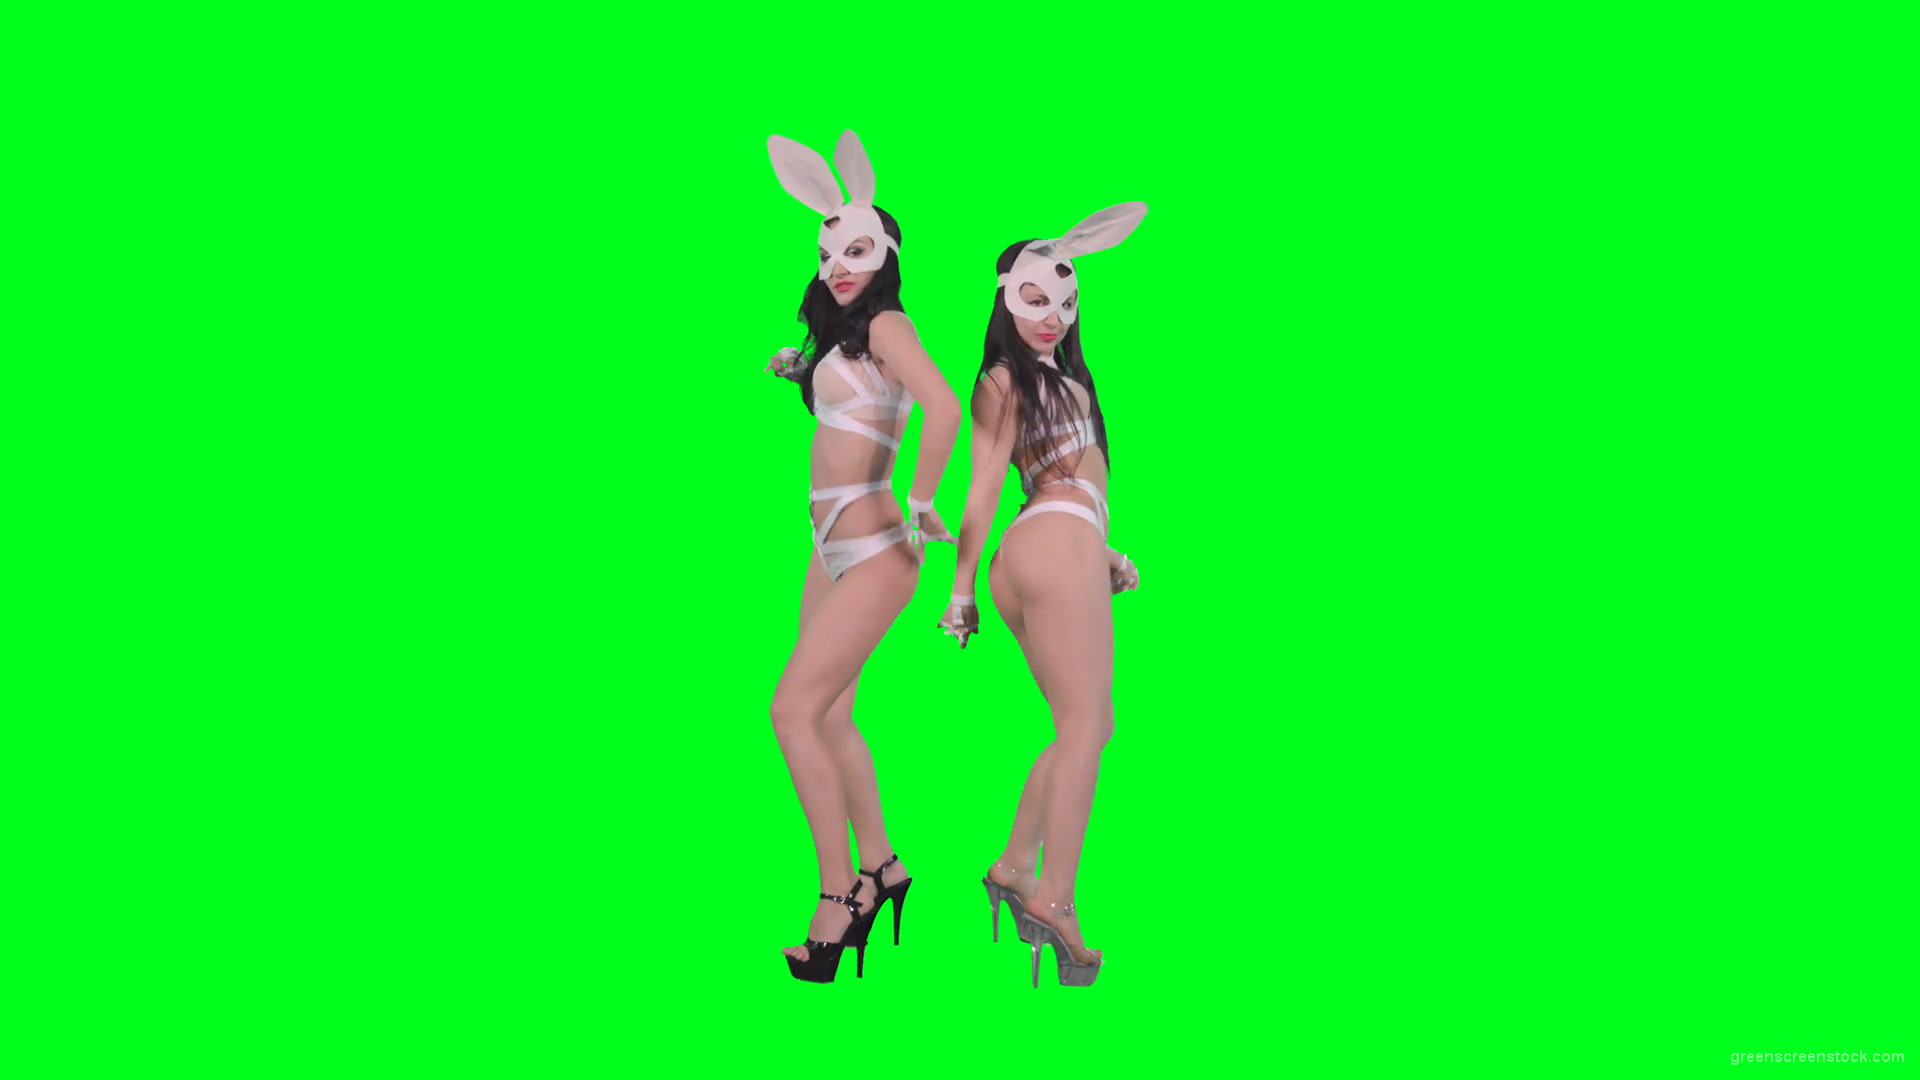 Go-Go-Dancing-female-team-duet-making-erotic-moves-on-green-screen-4K-Video-Footage-1920_006 Green Screen Stock